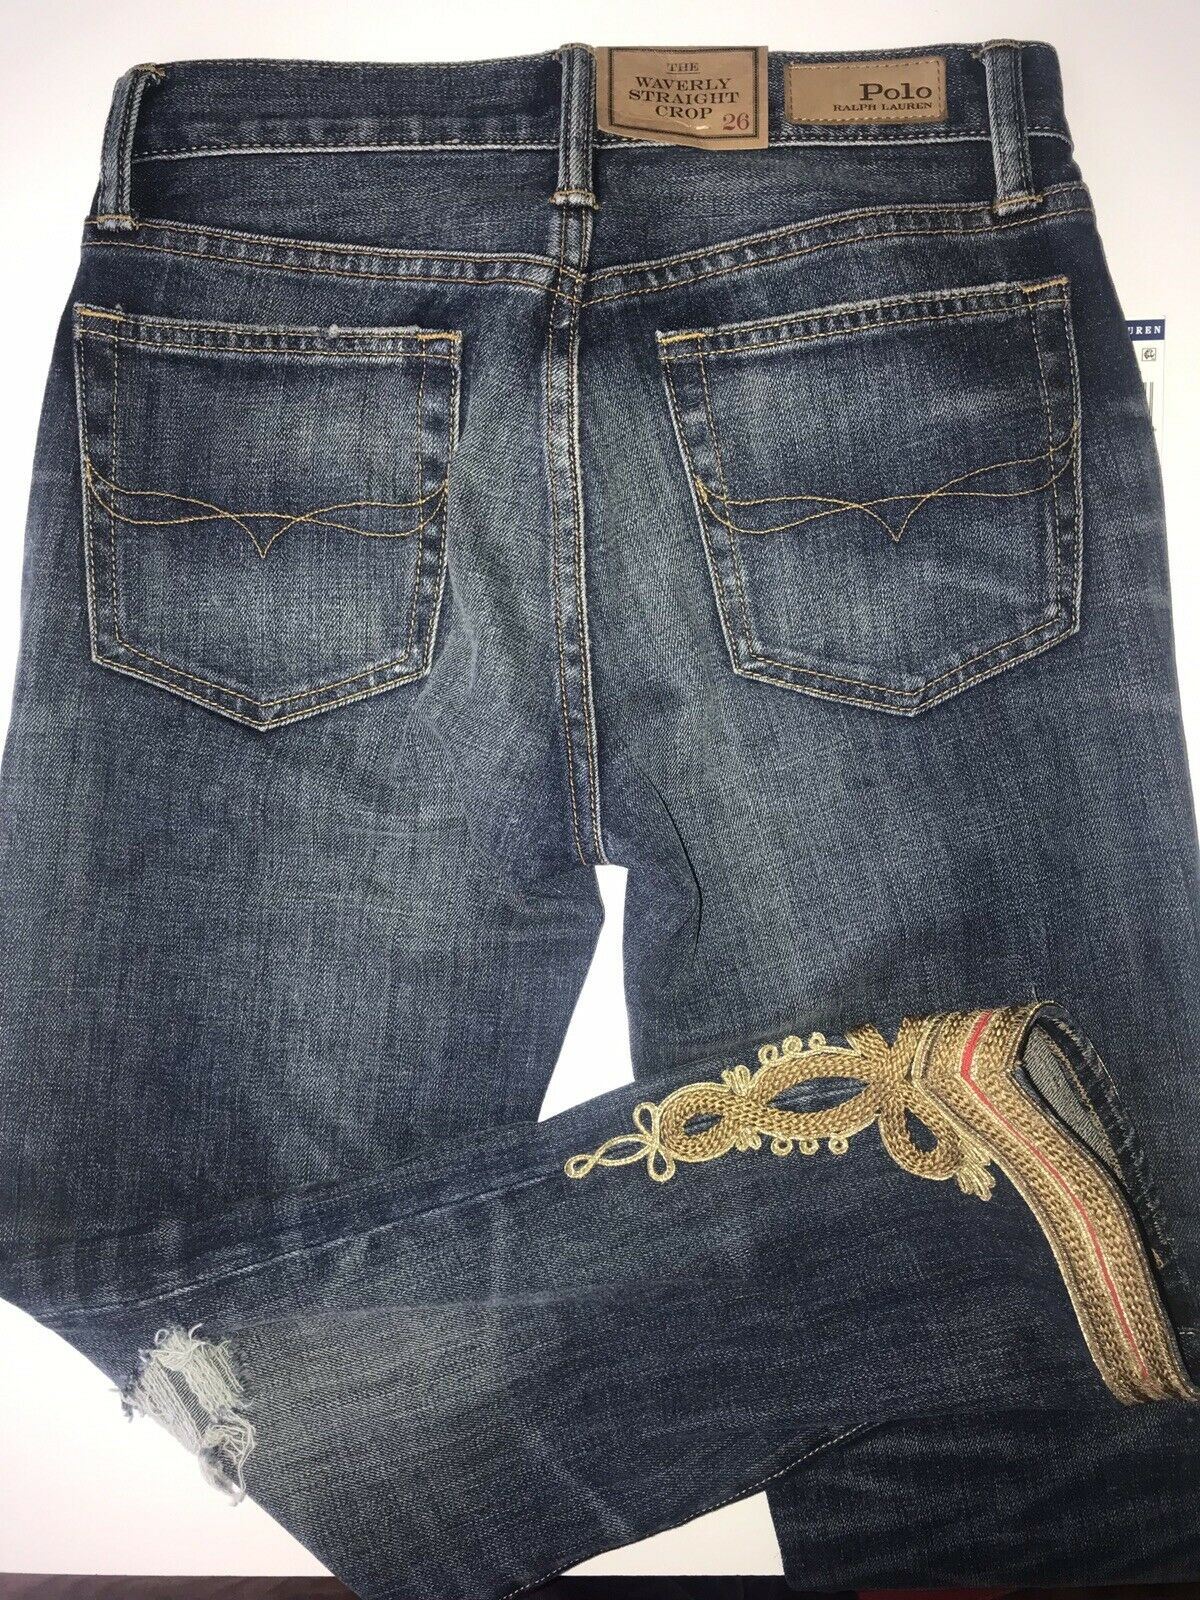 NWT $298 Polo Ralph Lauren Waverly Straight Crop Embroidered Blue Jean ...